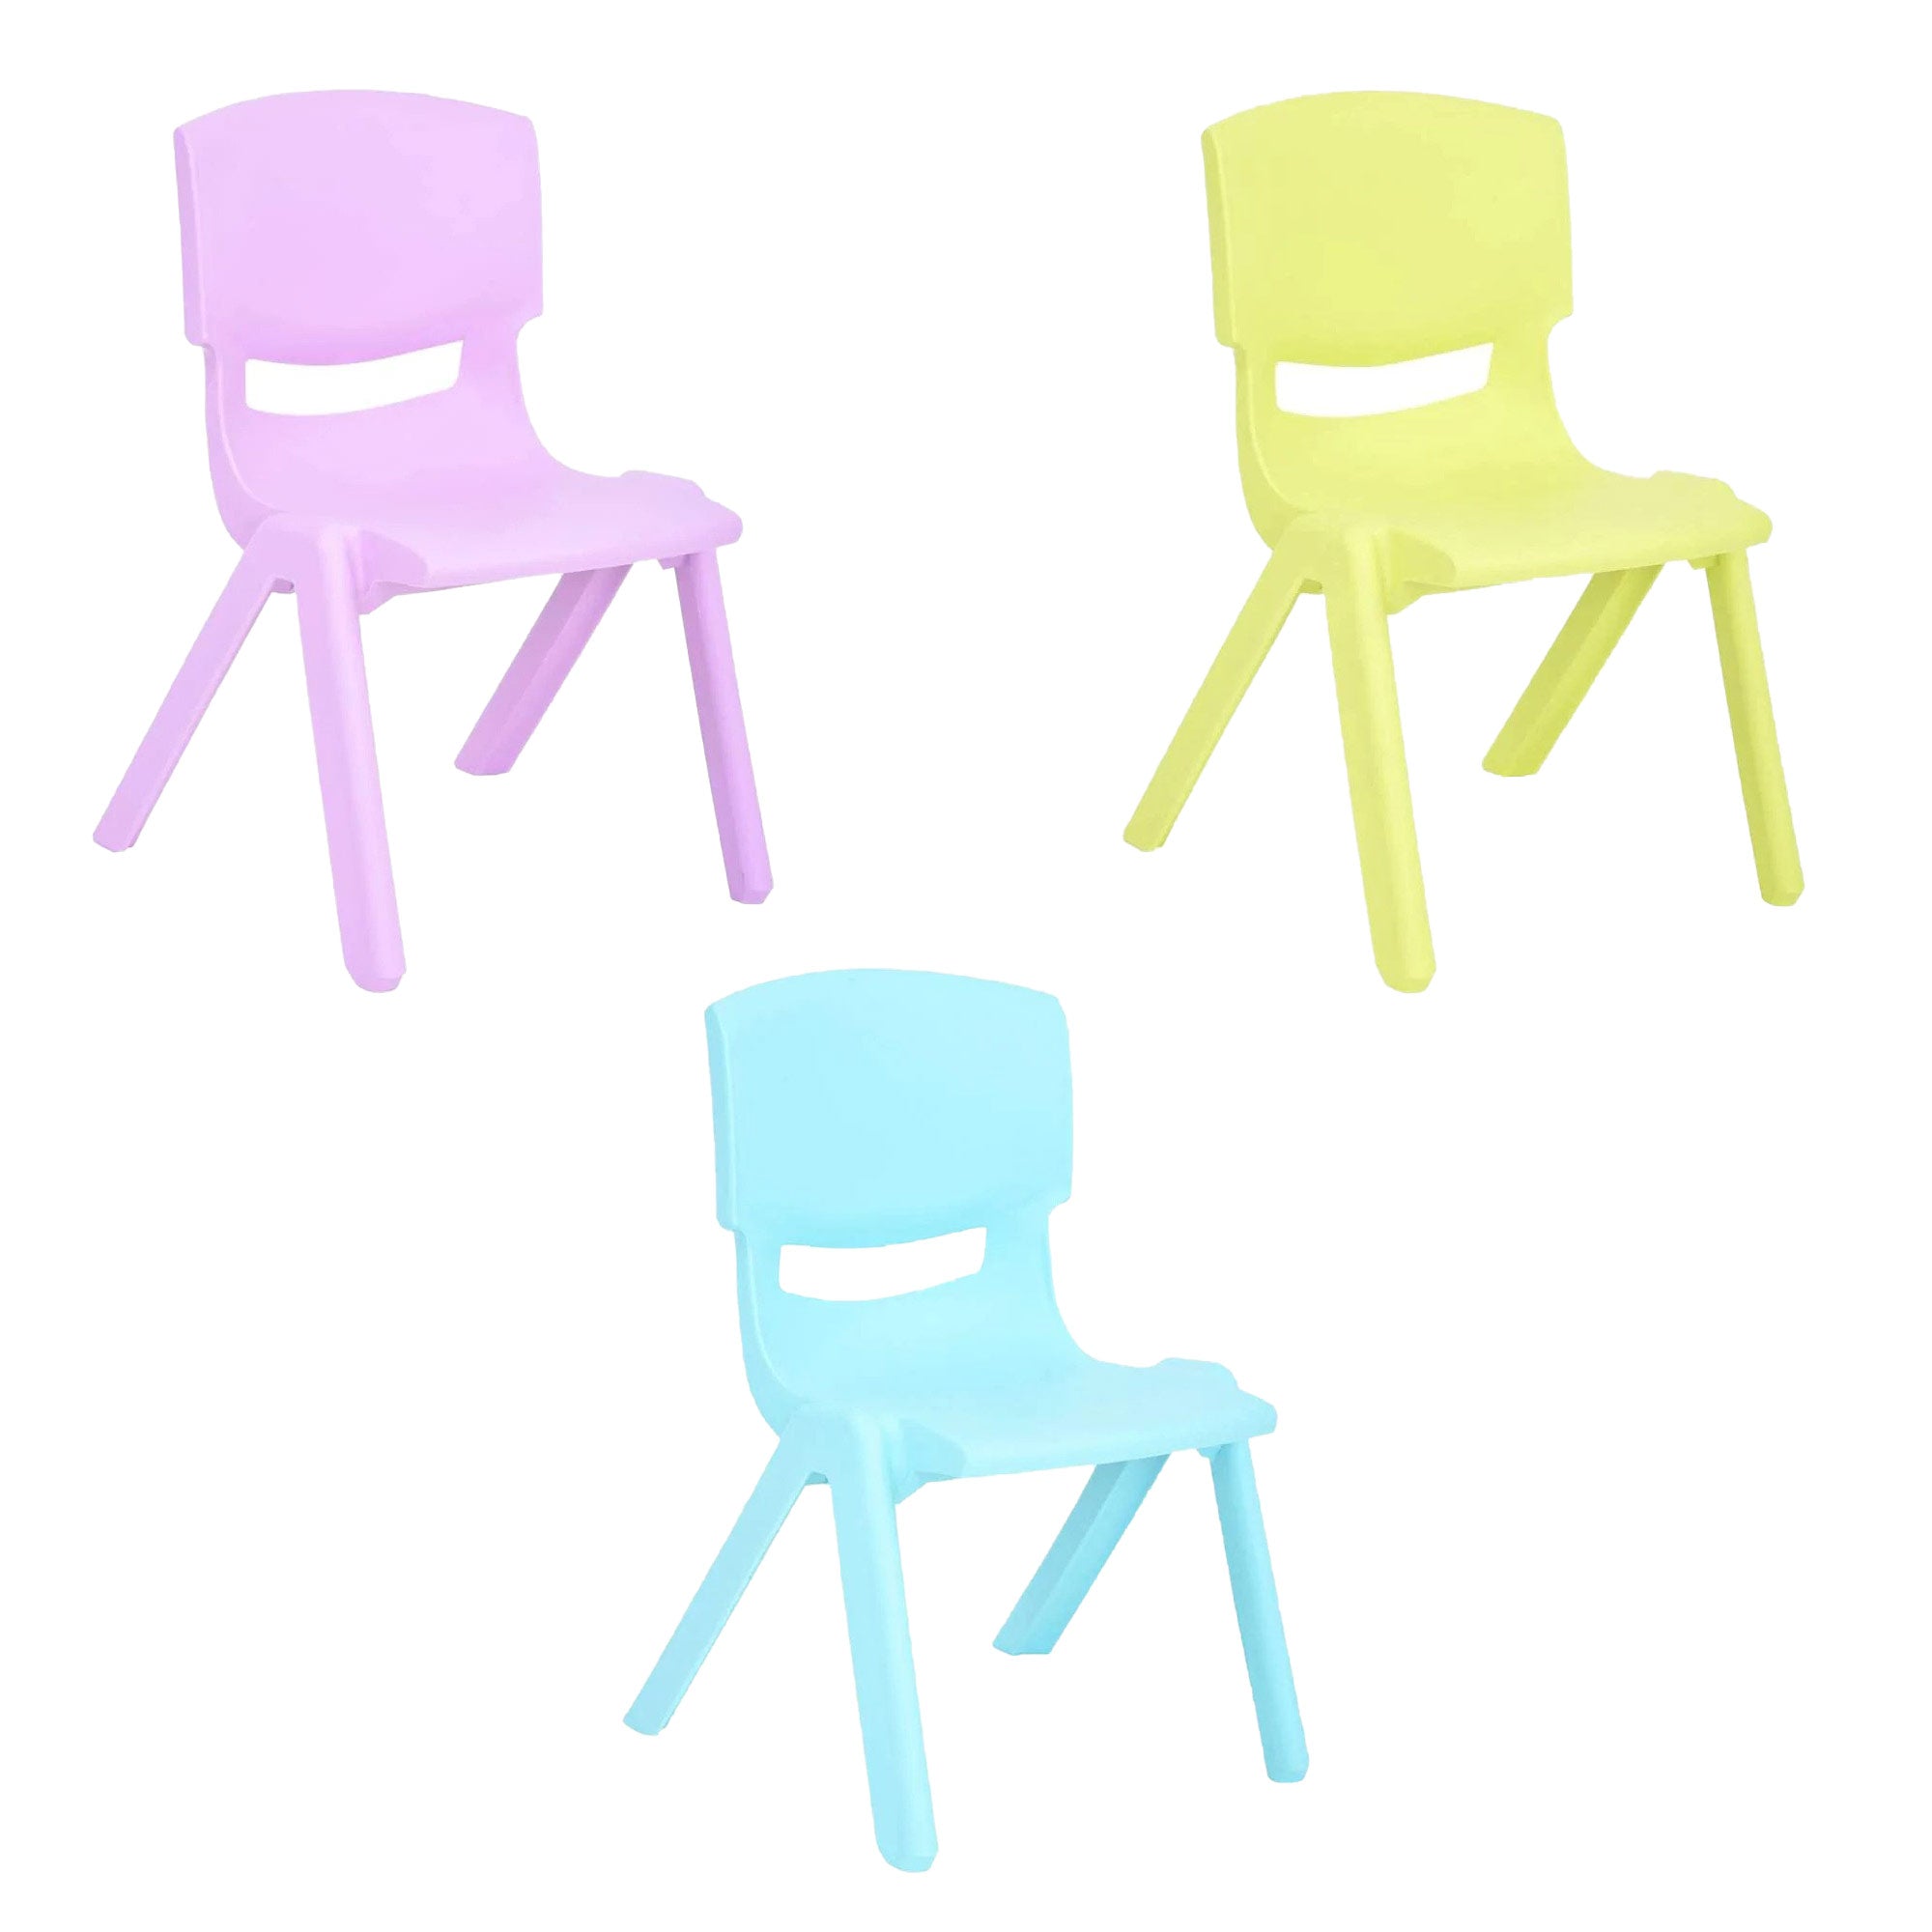 JOON Stackable Plastic Kids Learning Chairs Set, Lilac-Lime-Baby Blue